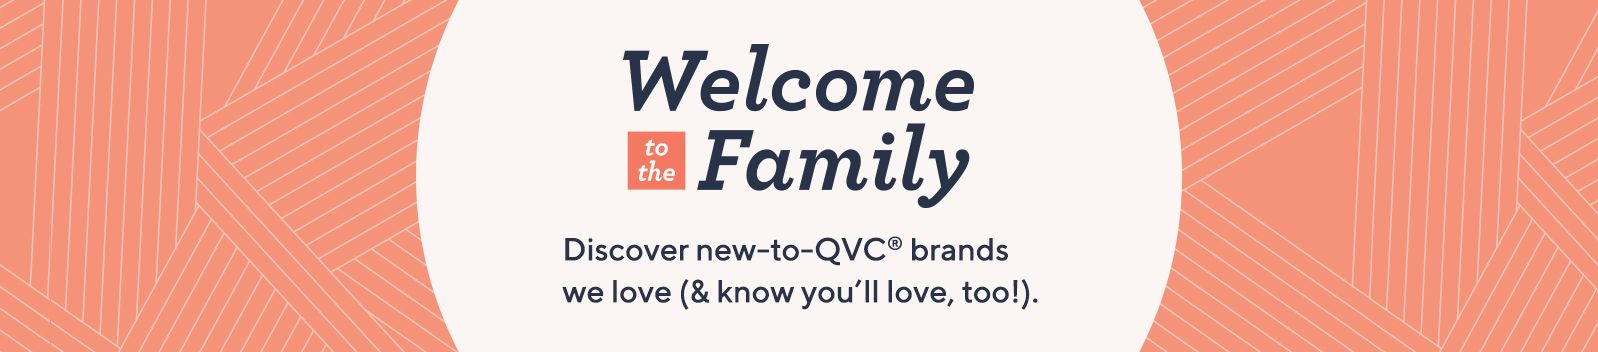 Welcome to the Family. Discover new-to-QVC® brands we love (& know you'll love, too!).